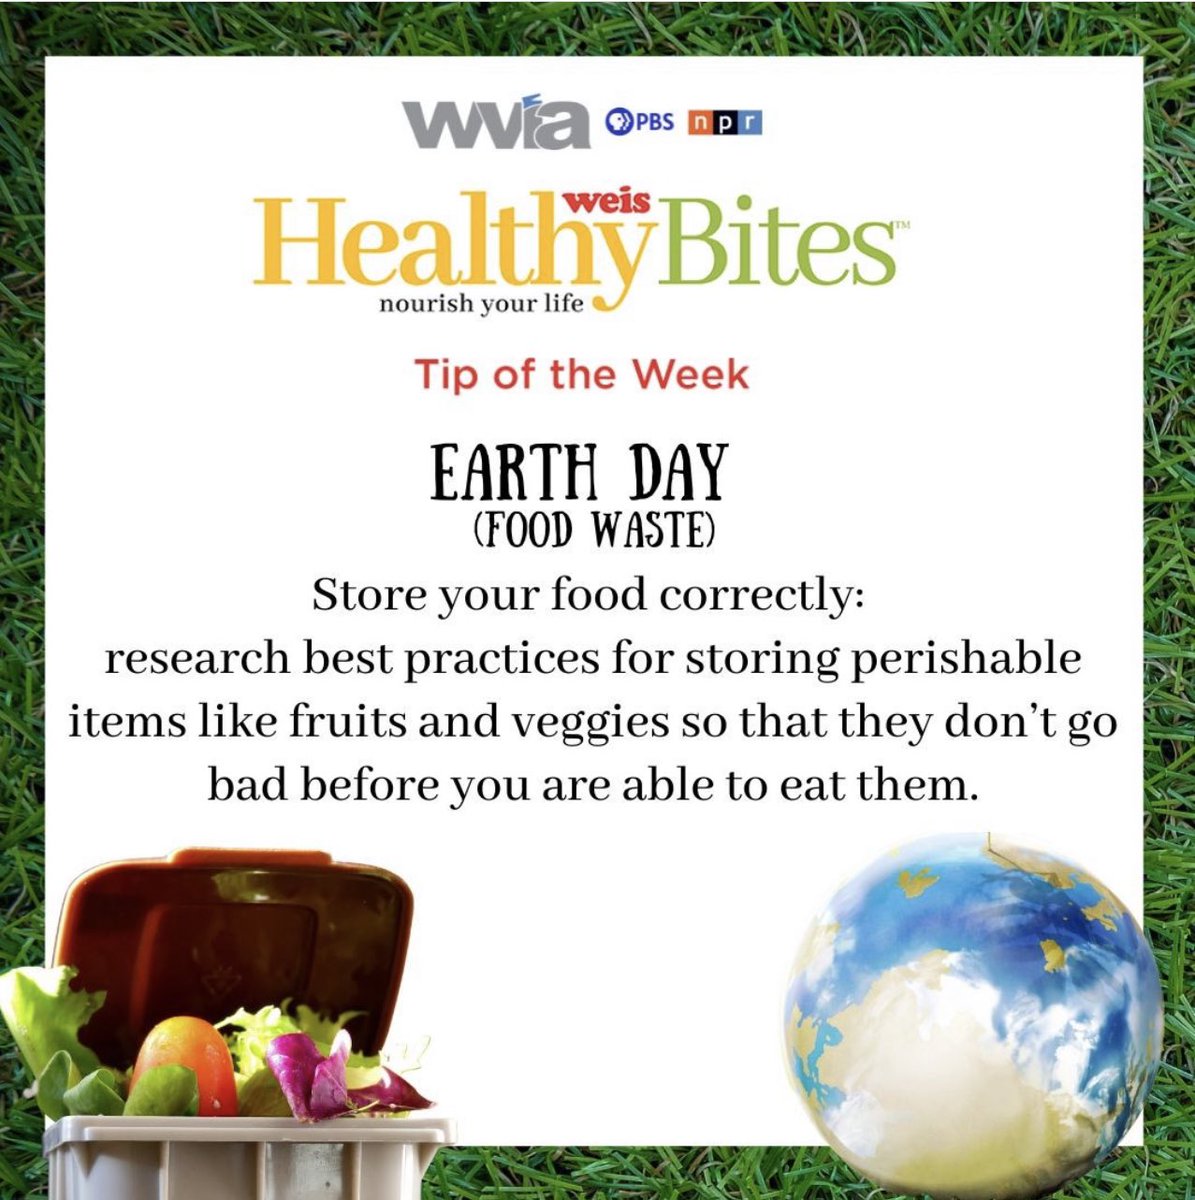 This week's Weis Markets HealthyBites Tip of the Week is all about Earth Day. Listen in to get all your Weis HealthyBites Tips at wvia.org/weis. Check back next week for another Weis HealthyBites Tip of the Week! #Weis #WeisHealthyBites #WVIA #EarthDay @WeisMarkets